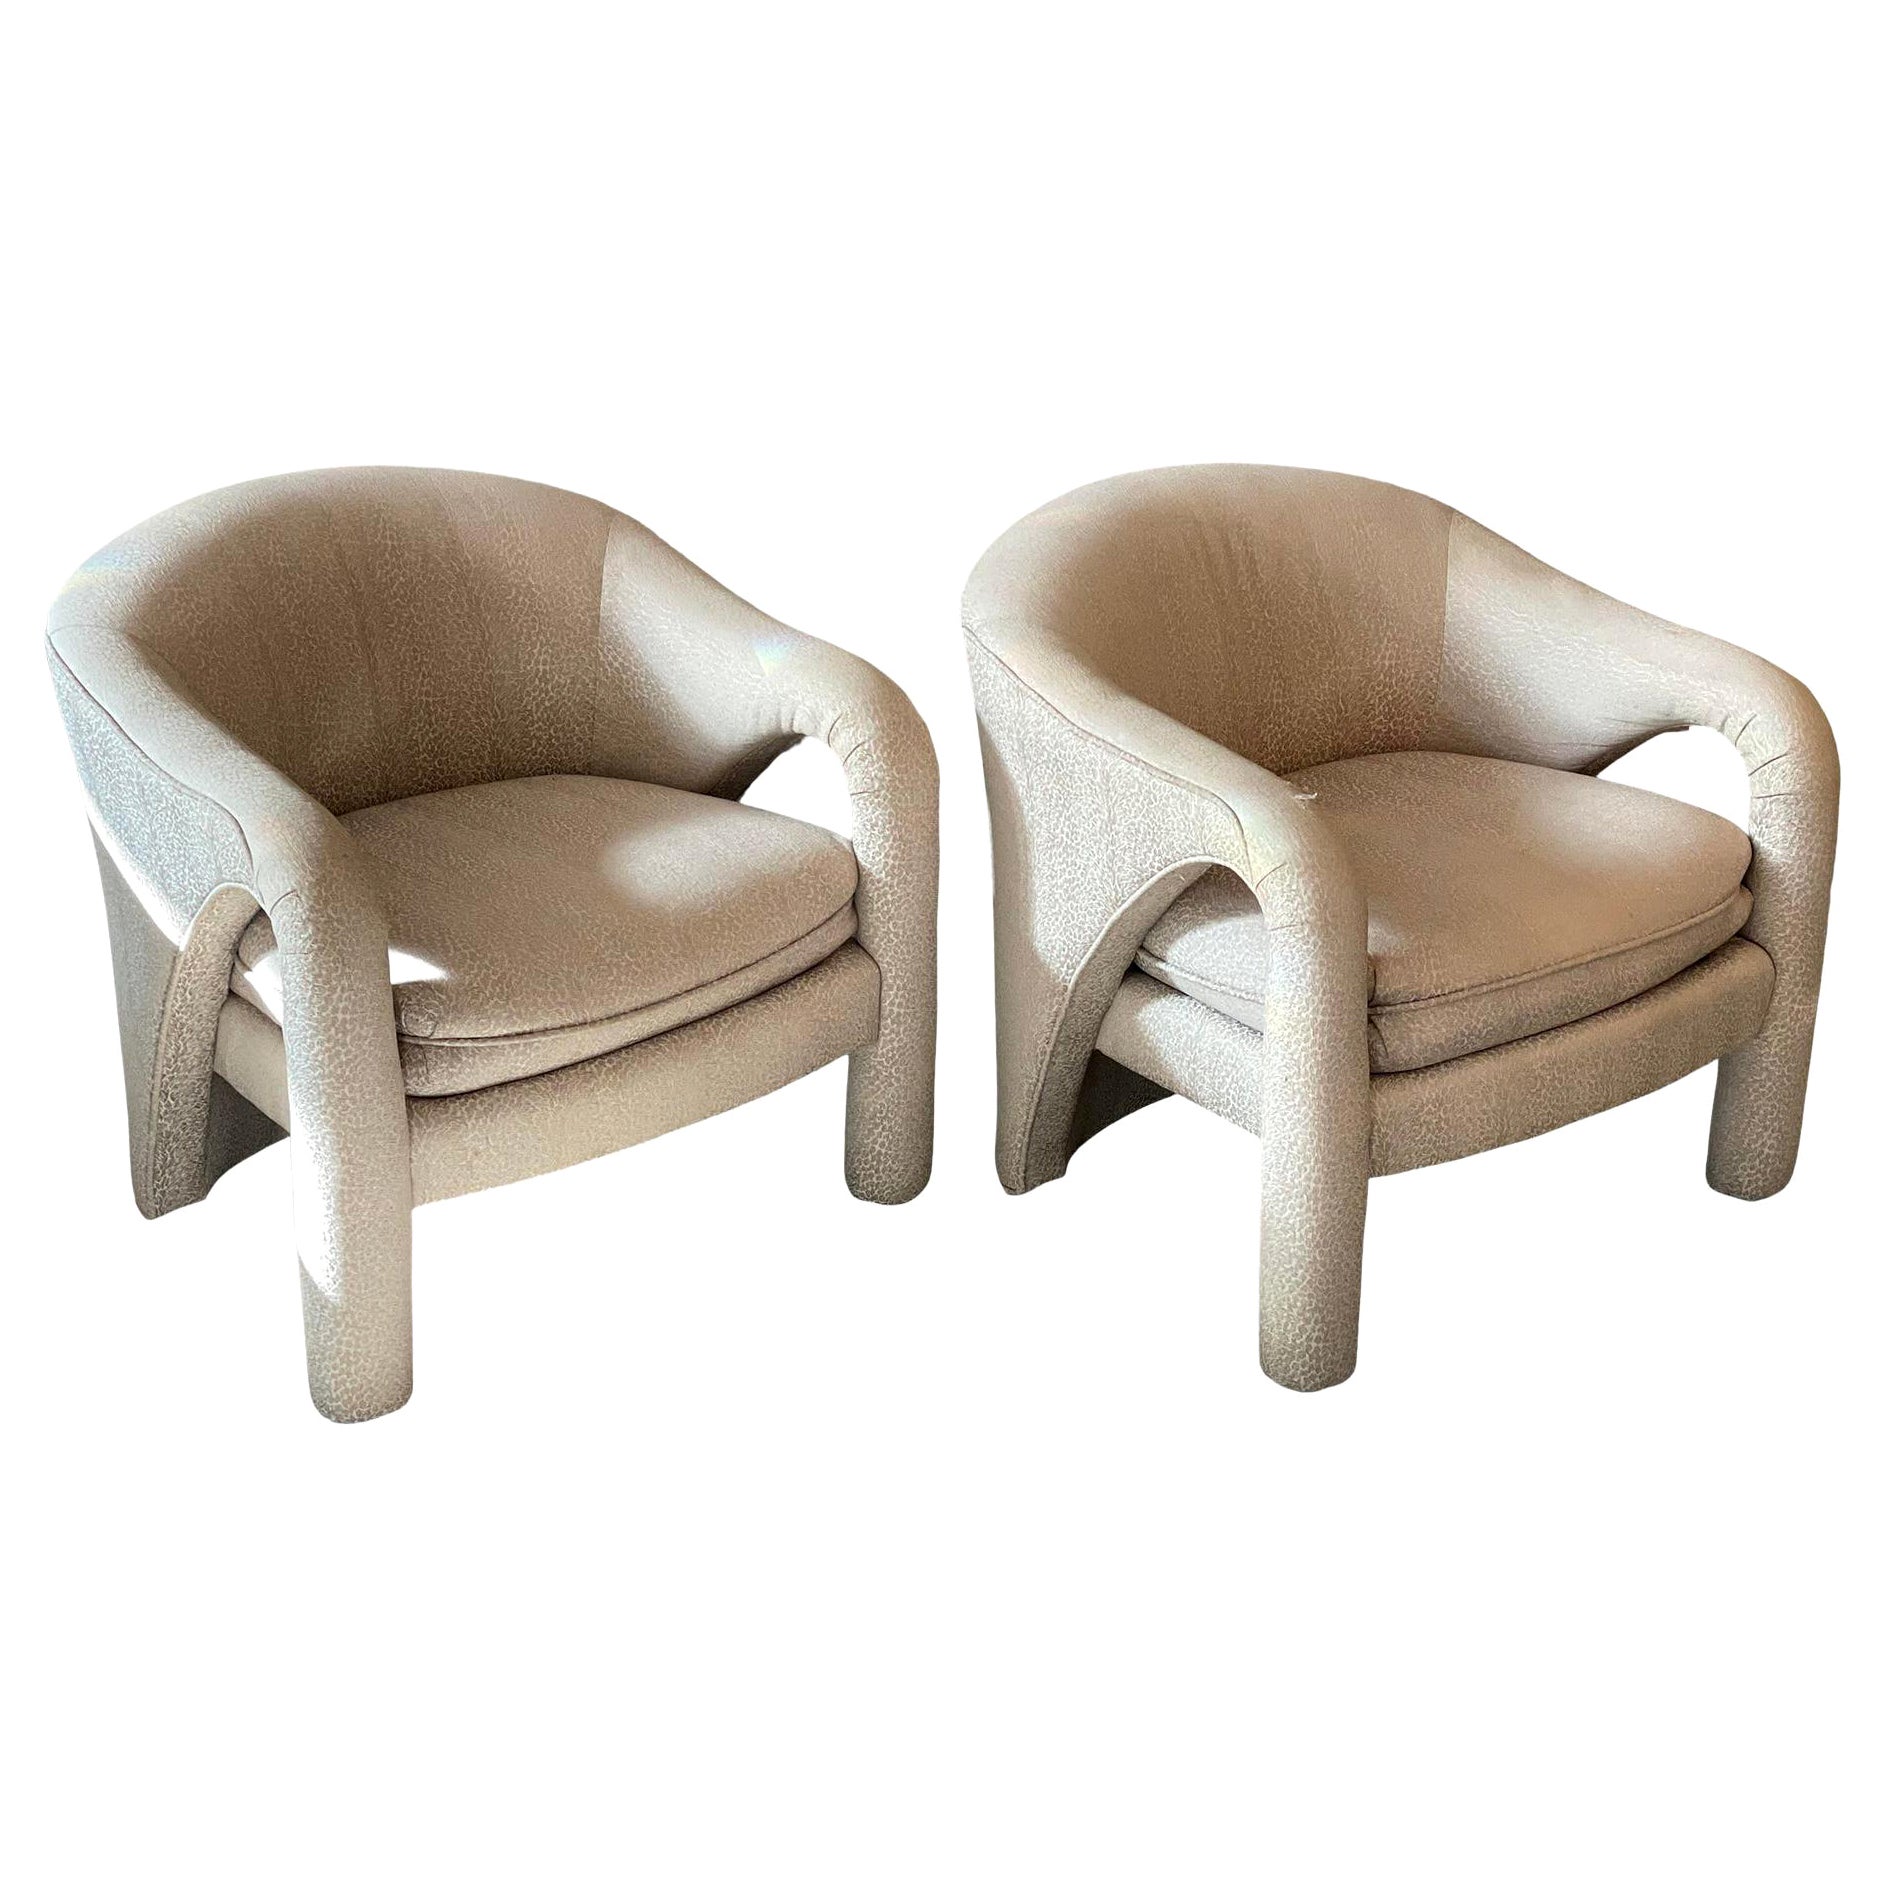 1980s Postmodern Sculptural Arc Chairs in Beige Upholstery, a Pair